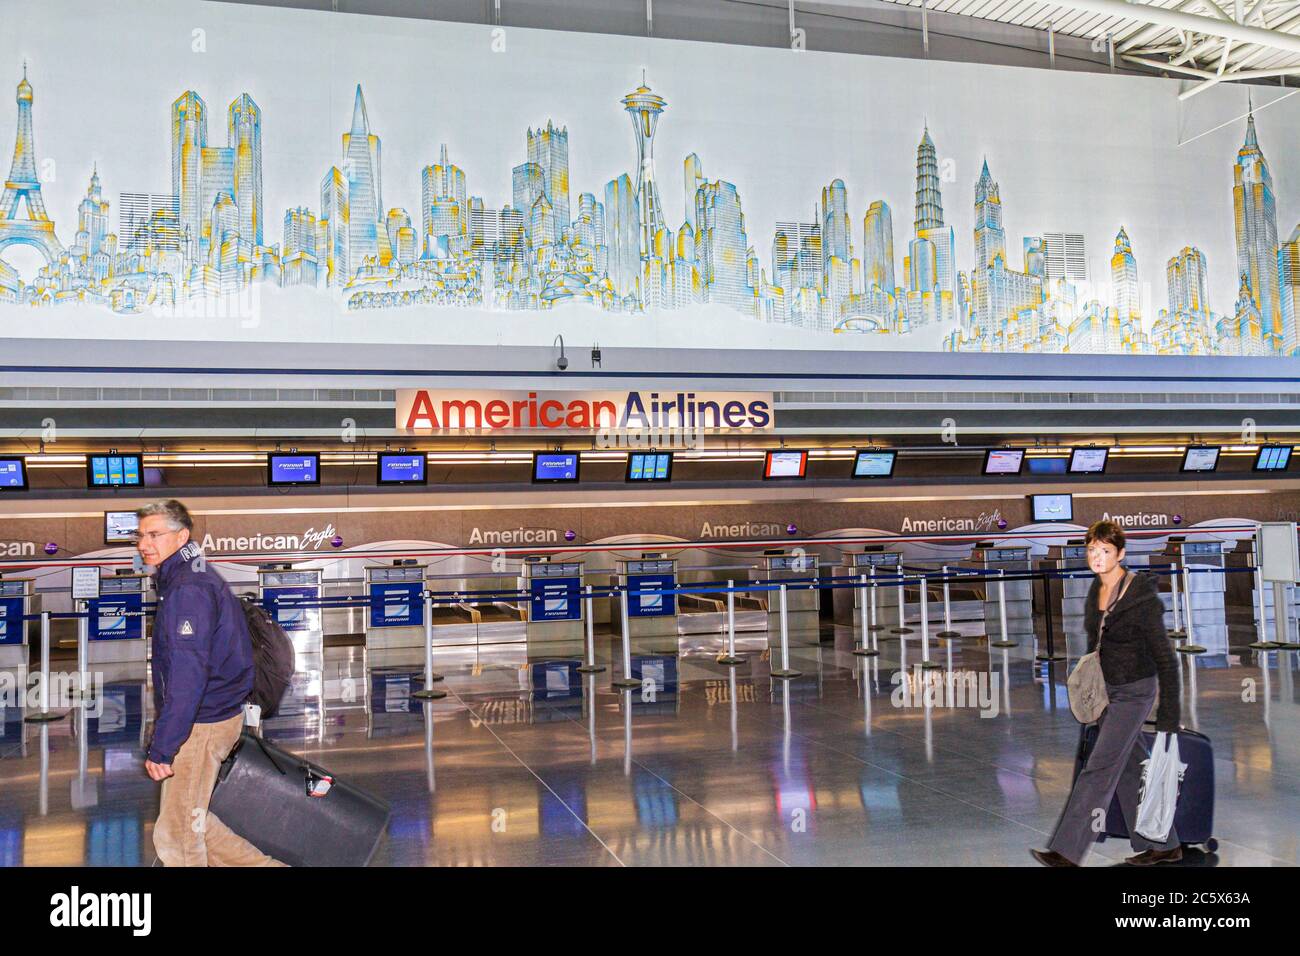 New York City,NYC NY Brooklyn,John F. Kennedy International Airport,JFK,American Airlines,company,US carrier,terminal,mural,man men male adult adults, Stock Photo